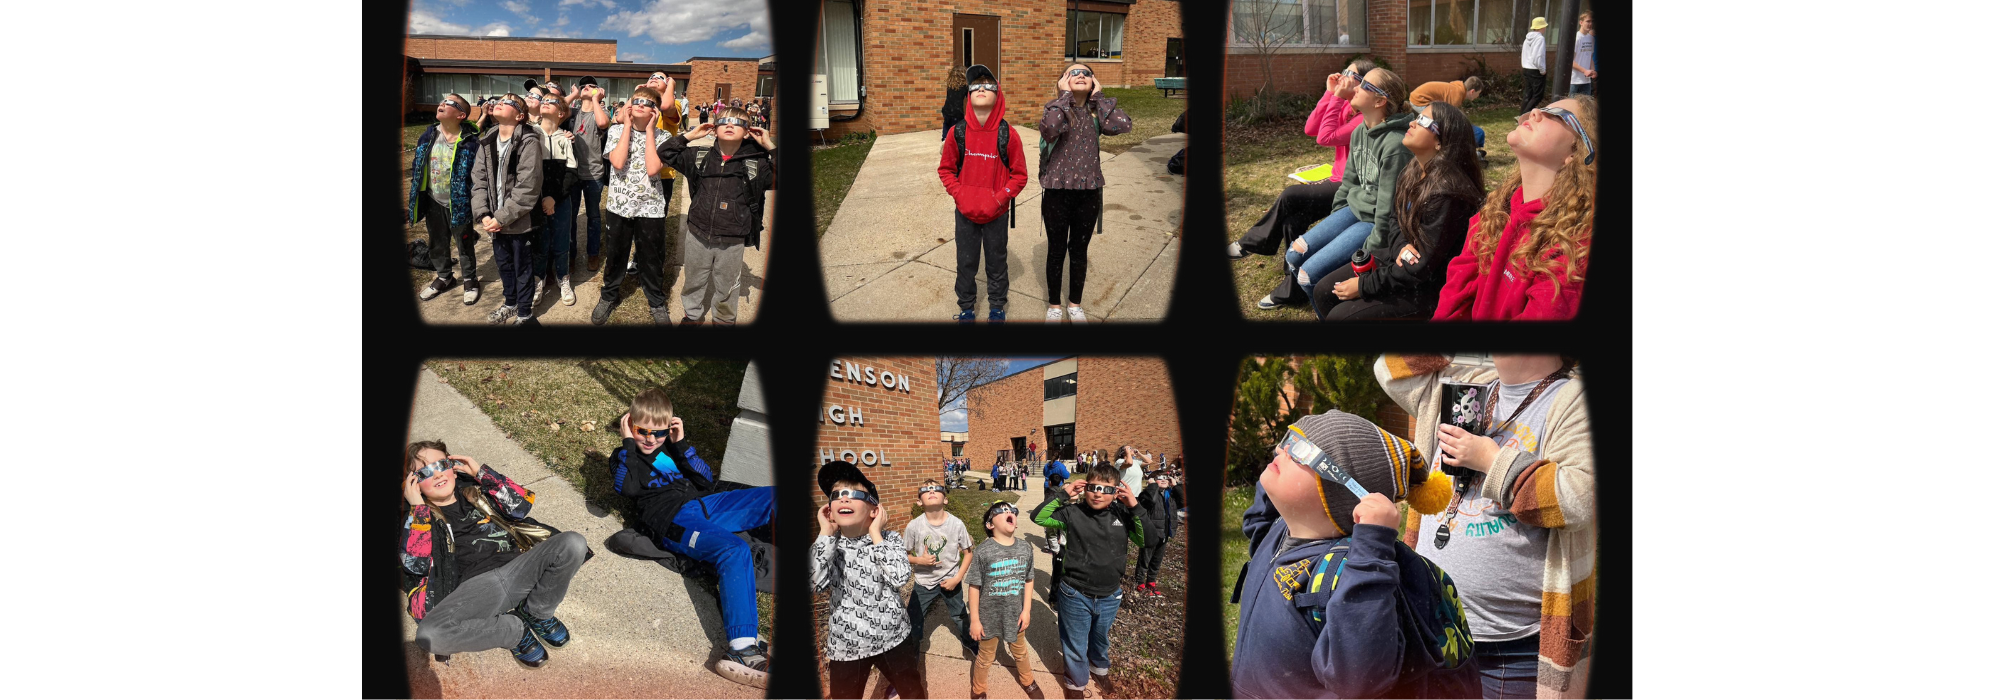 Students with glasses looking at eclipse